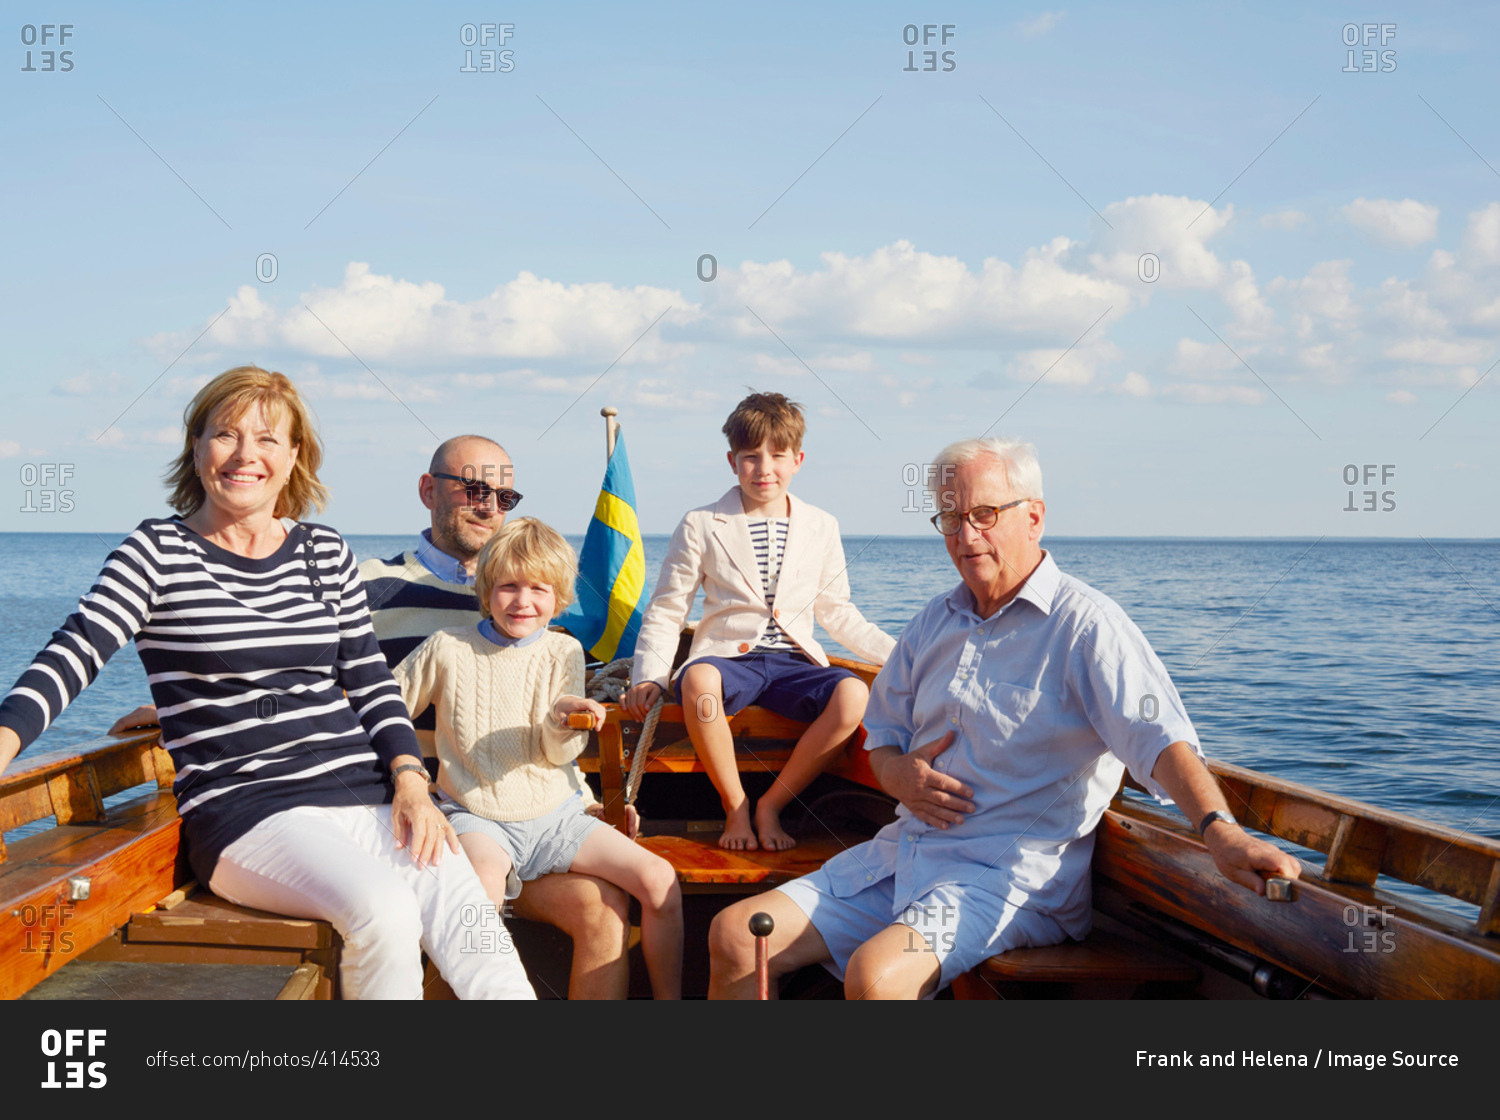 Family on boat looking at camera smiling